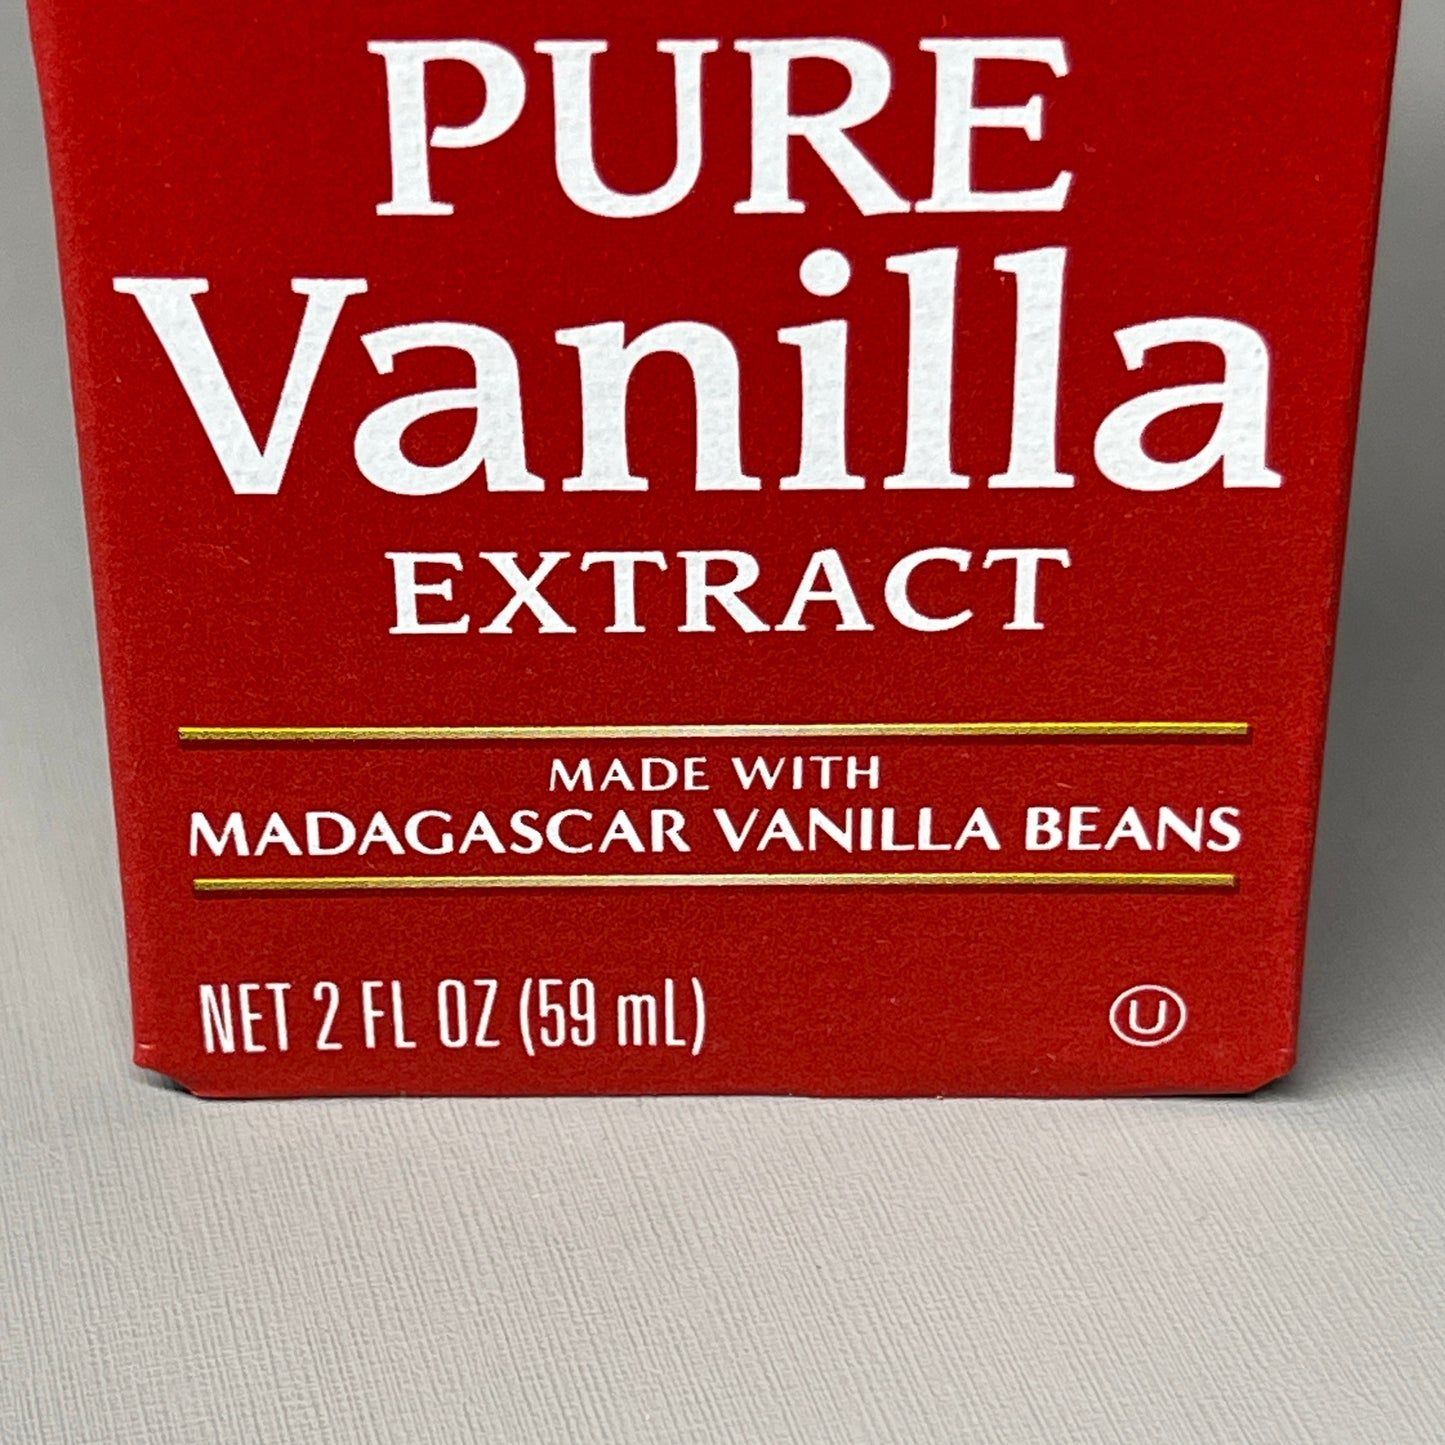 MCCORMICK Pure Vanilla Extract 2.0 fl oz (59ml) Best By 7/25 (New)